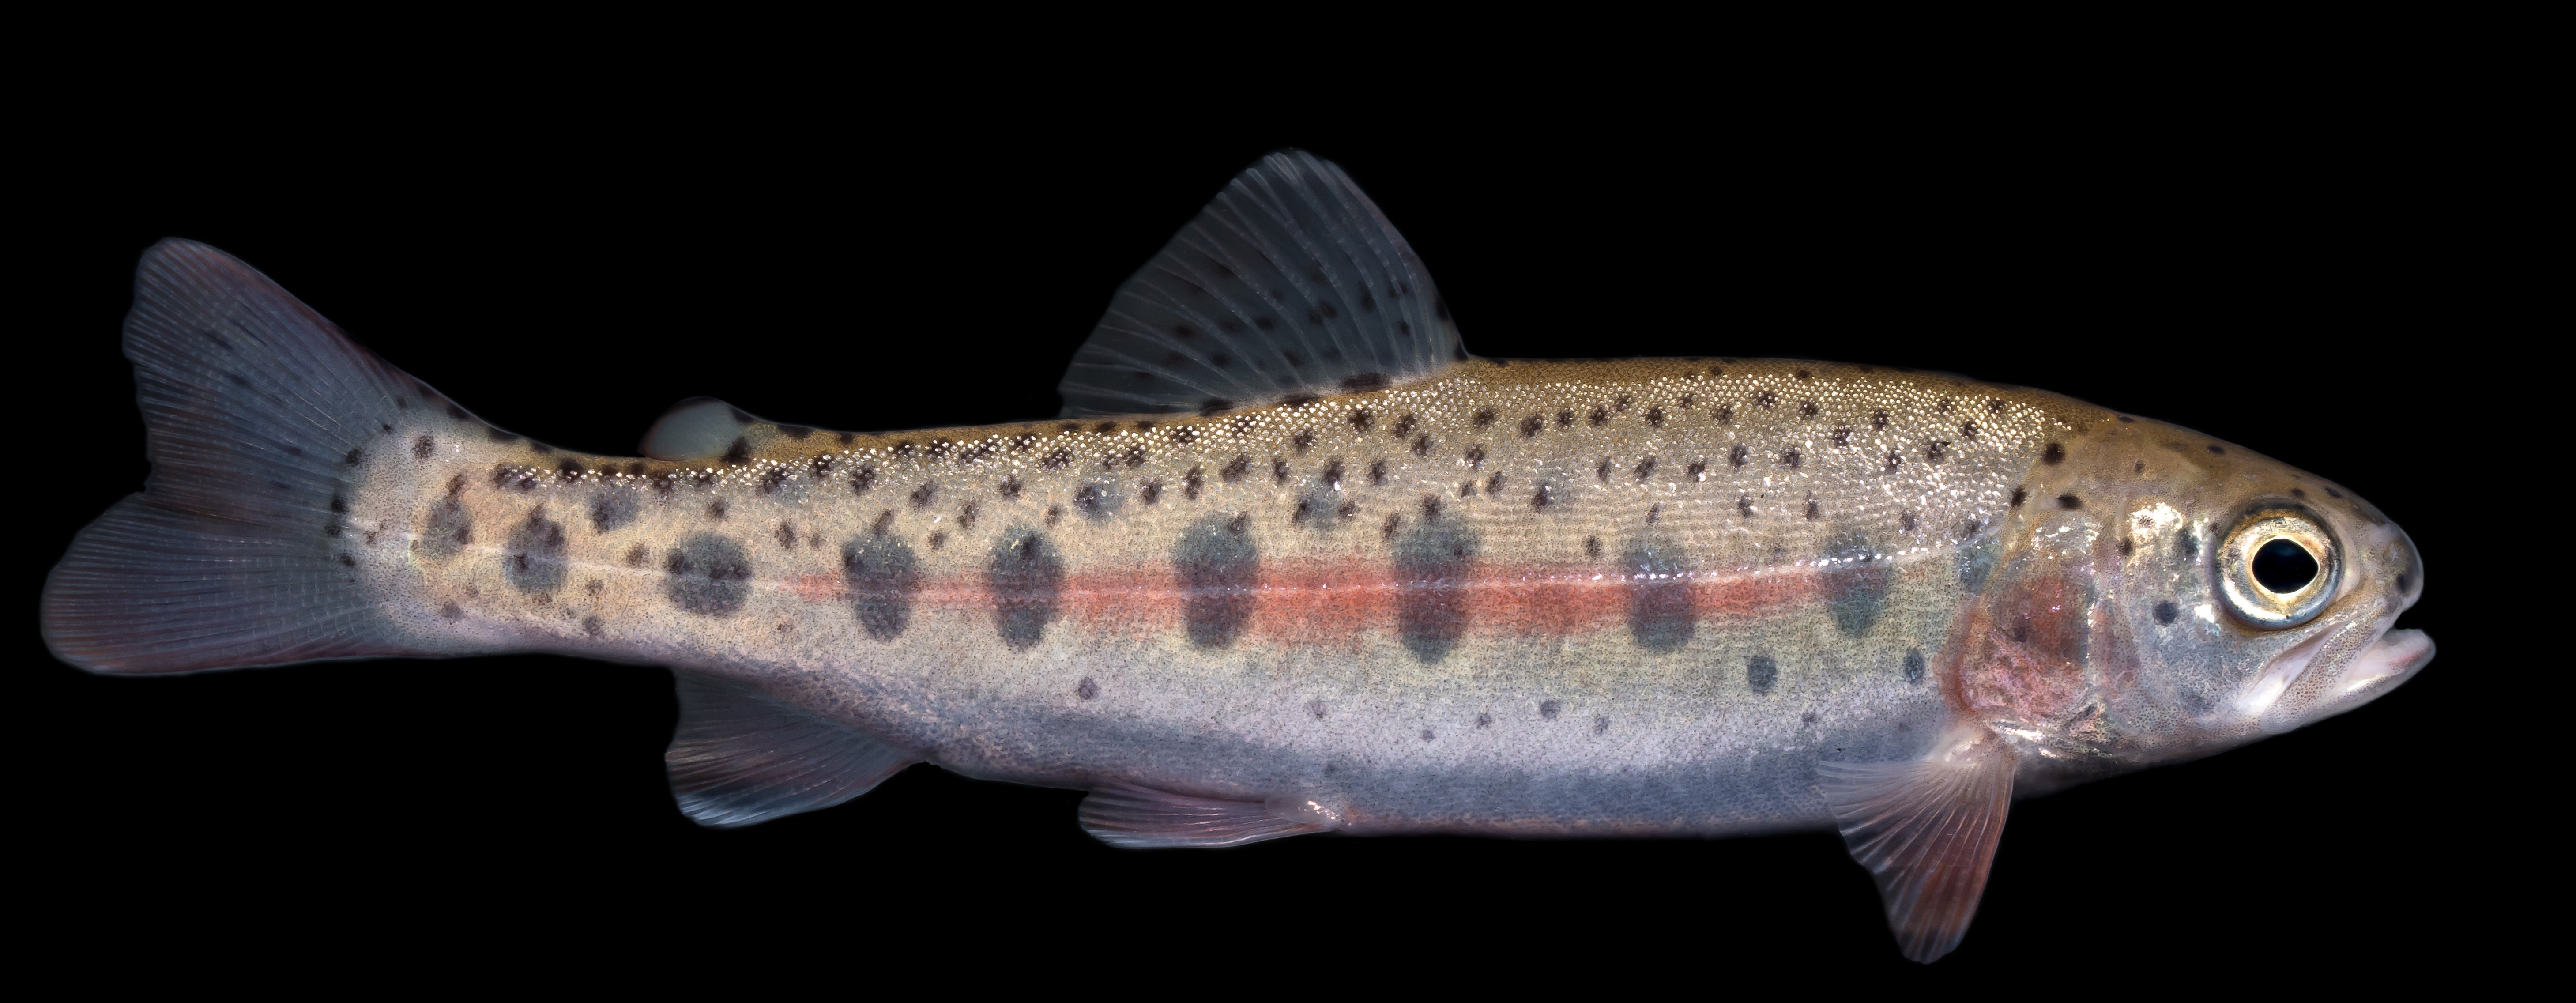 A small tan fish with a pink stripe and dark speckles. The fish floats in front of a black background.